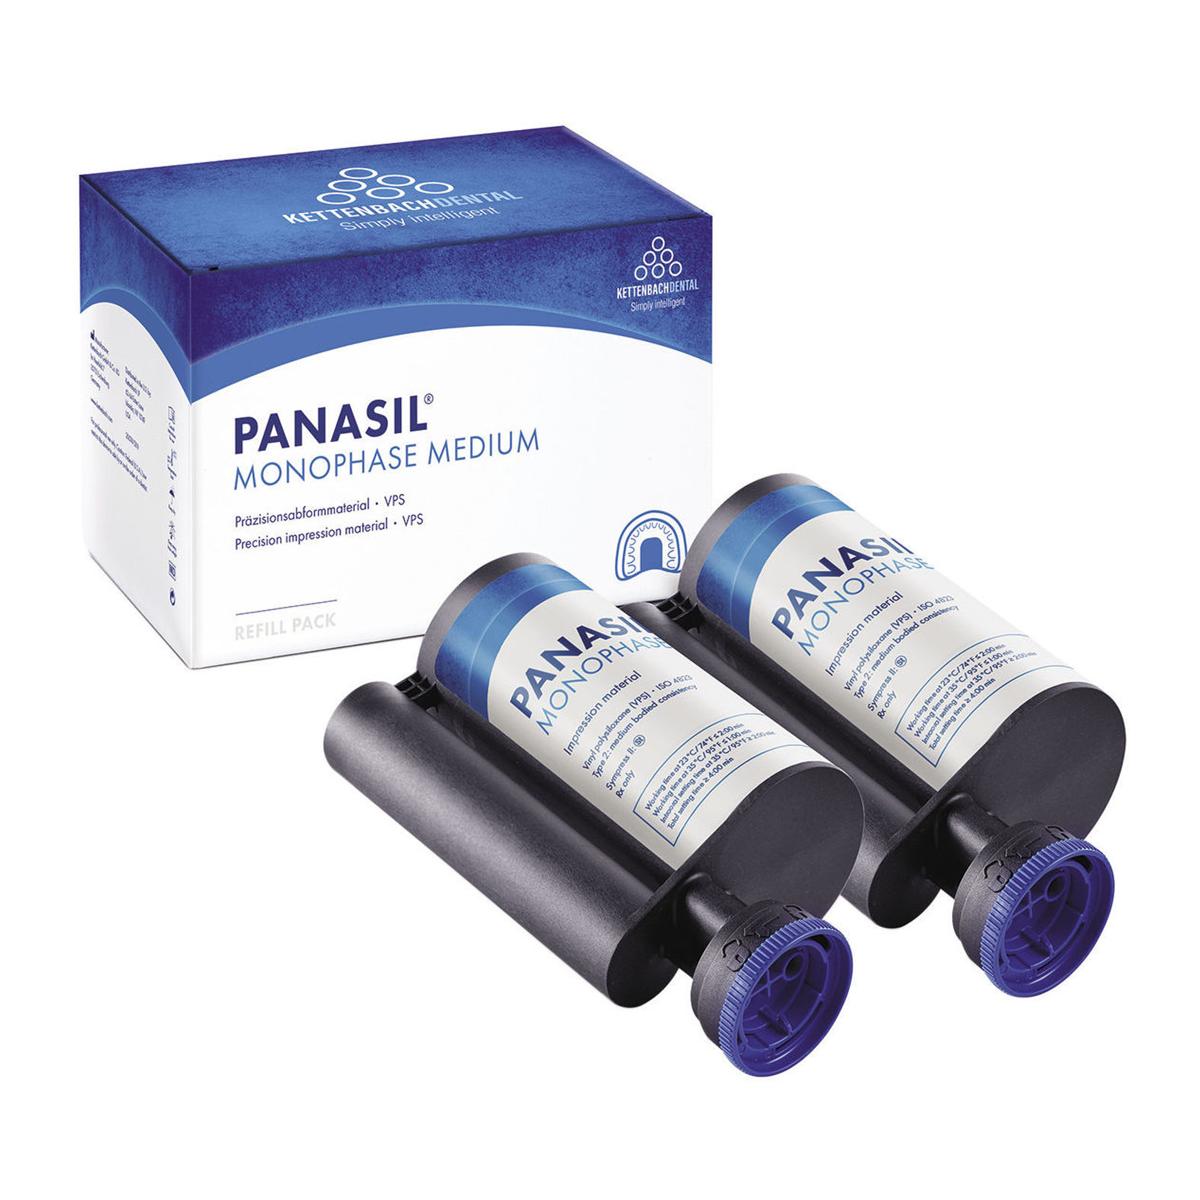 PANASIL MONOPHASE RICAMBI (PER MISCELAZIONE DINAMICA) - Refill pack: 2 x 380 ml cad.